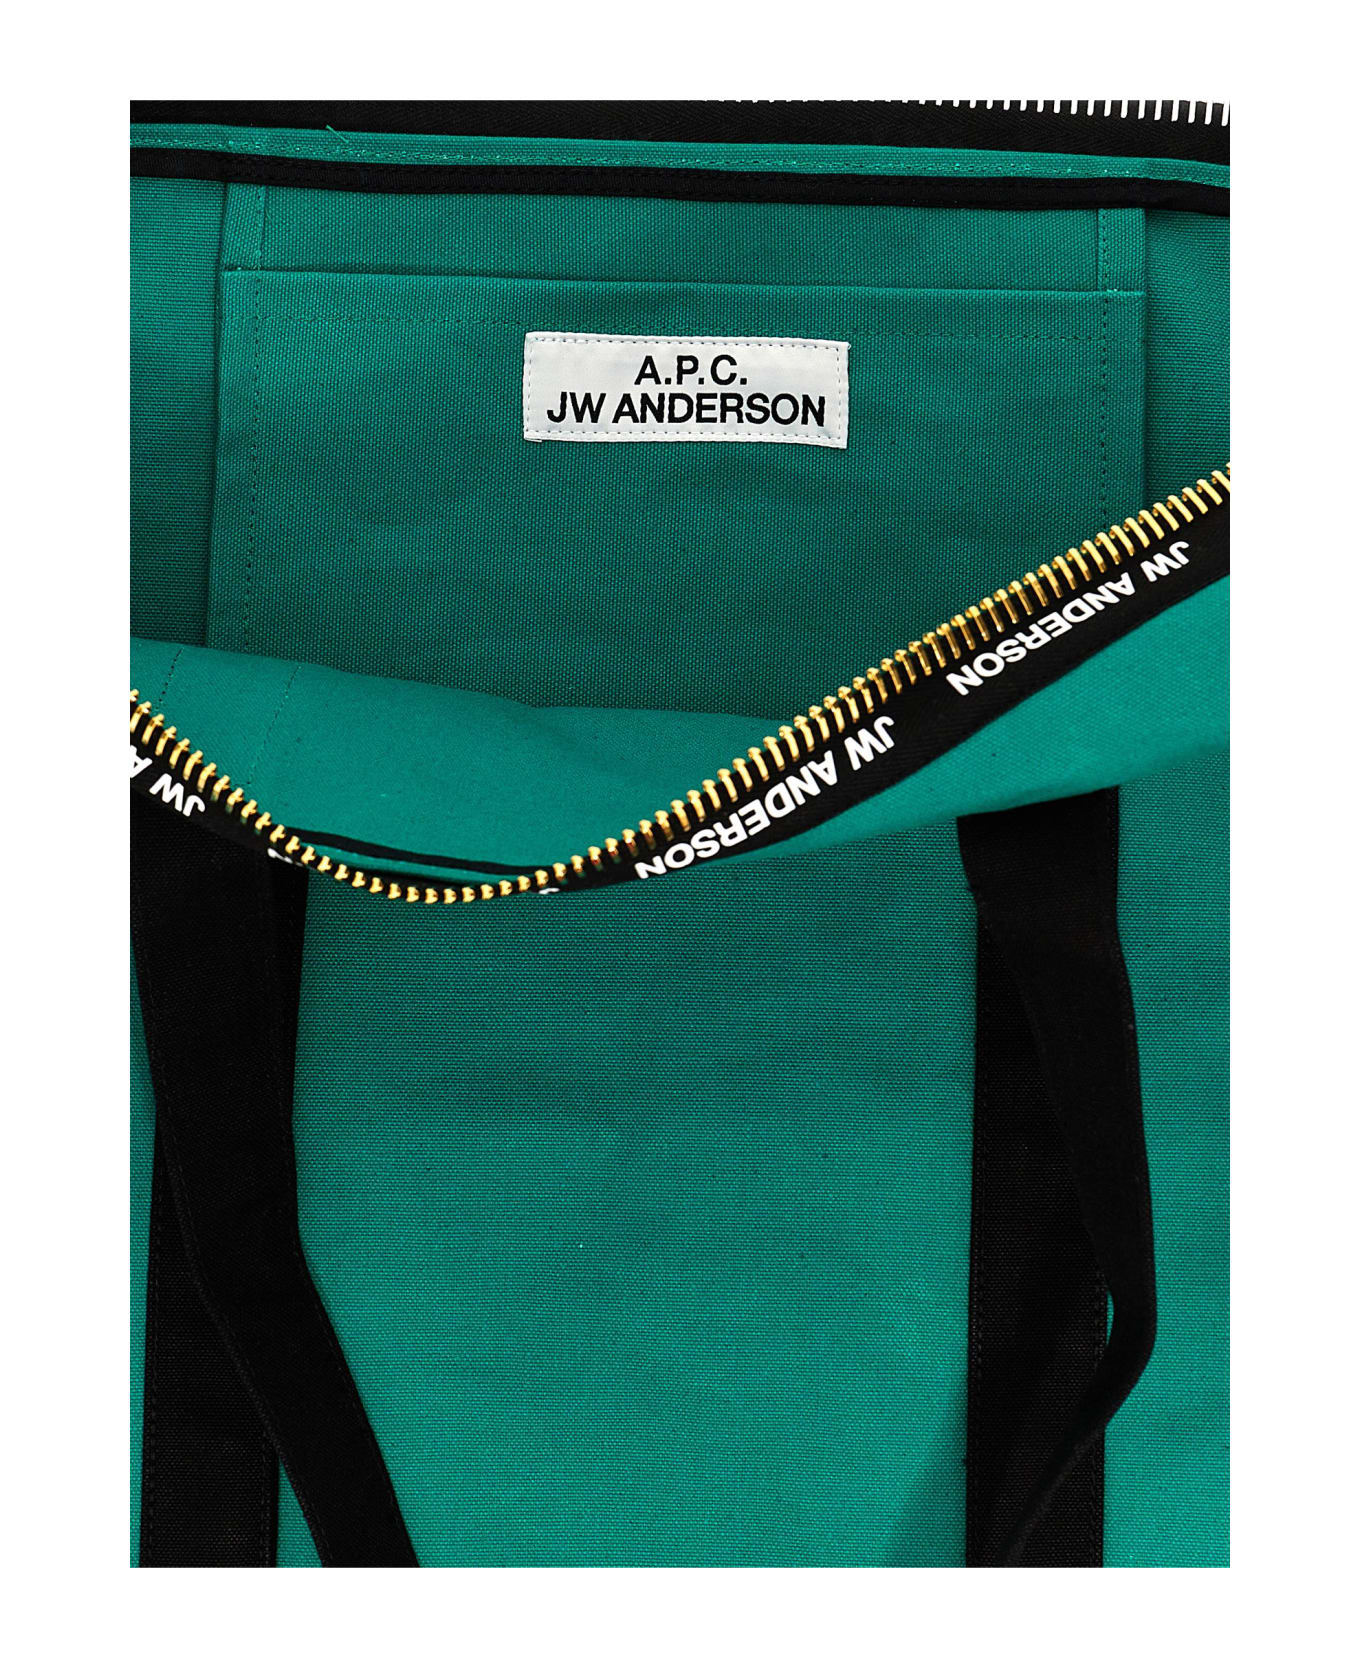 A.P.C. Tote Bag - Green トートバッグ